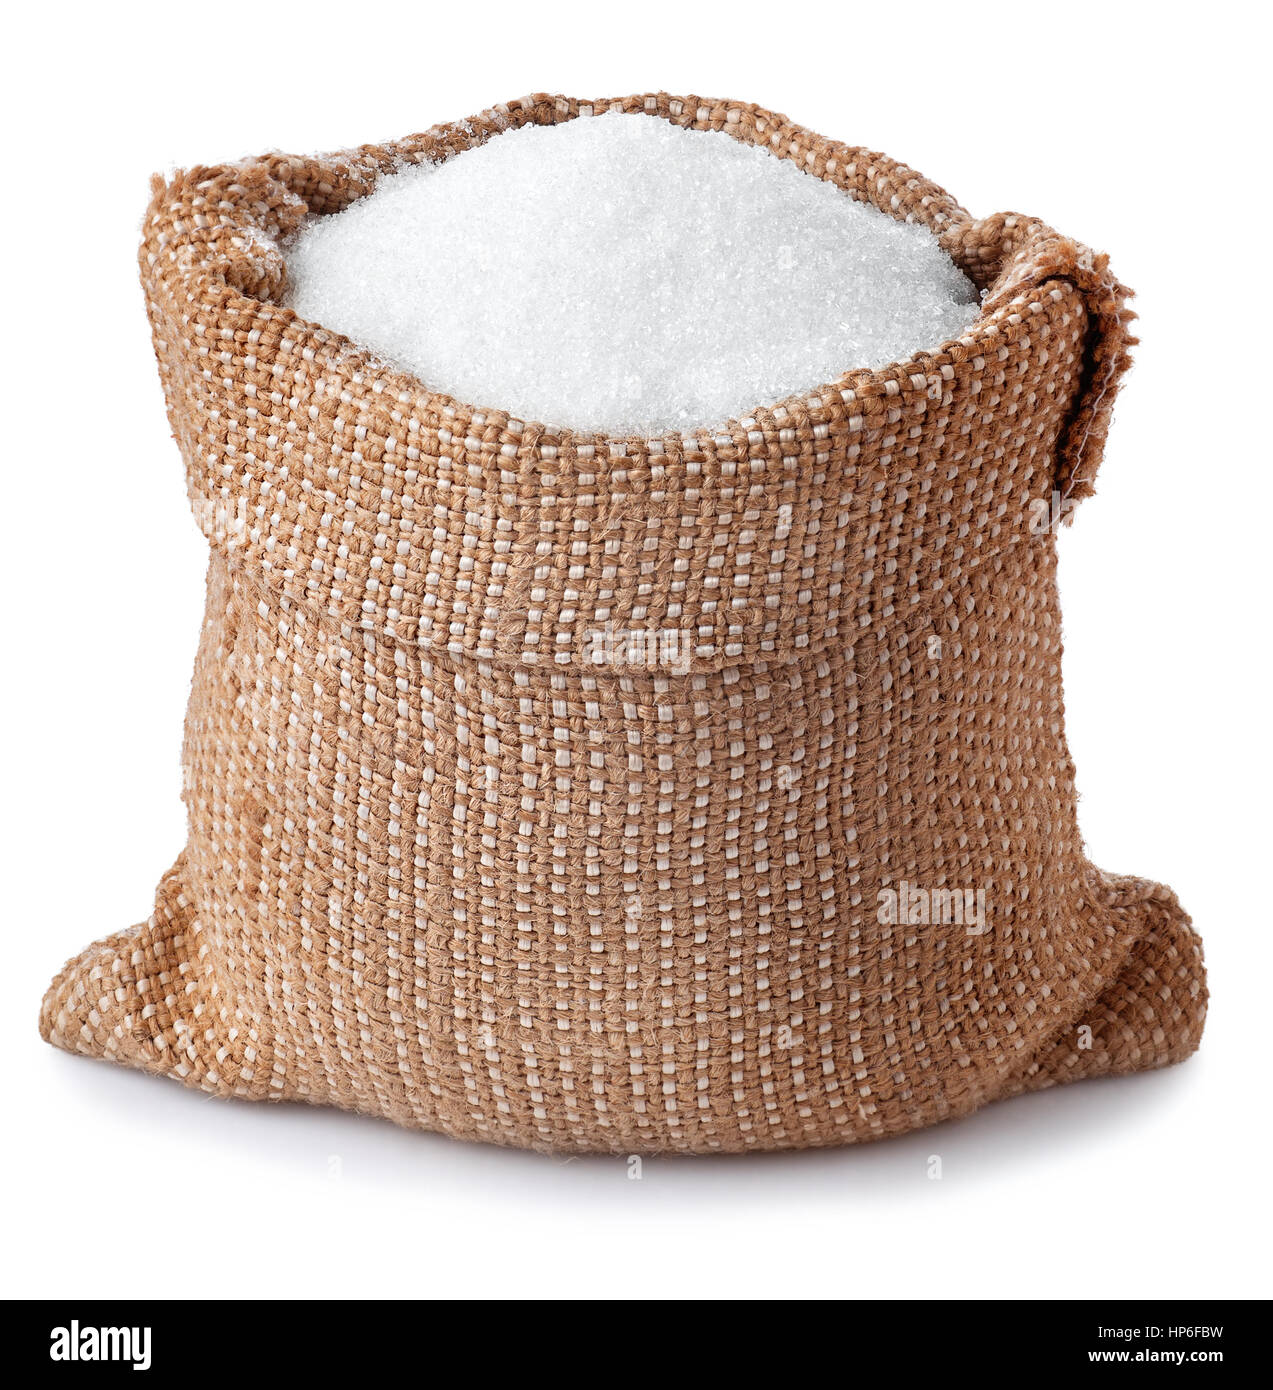 sugar in burlap sack isolated on white background. Full bag of sugar crystals closeup Stock Photo